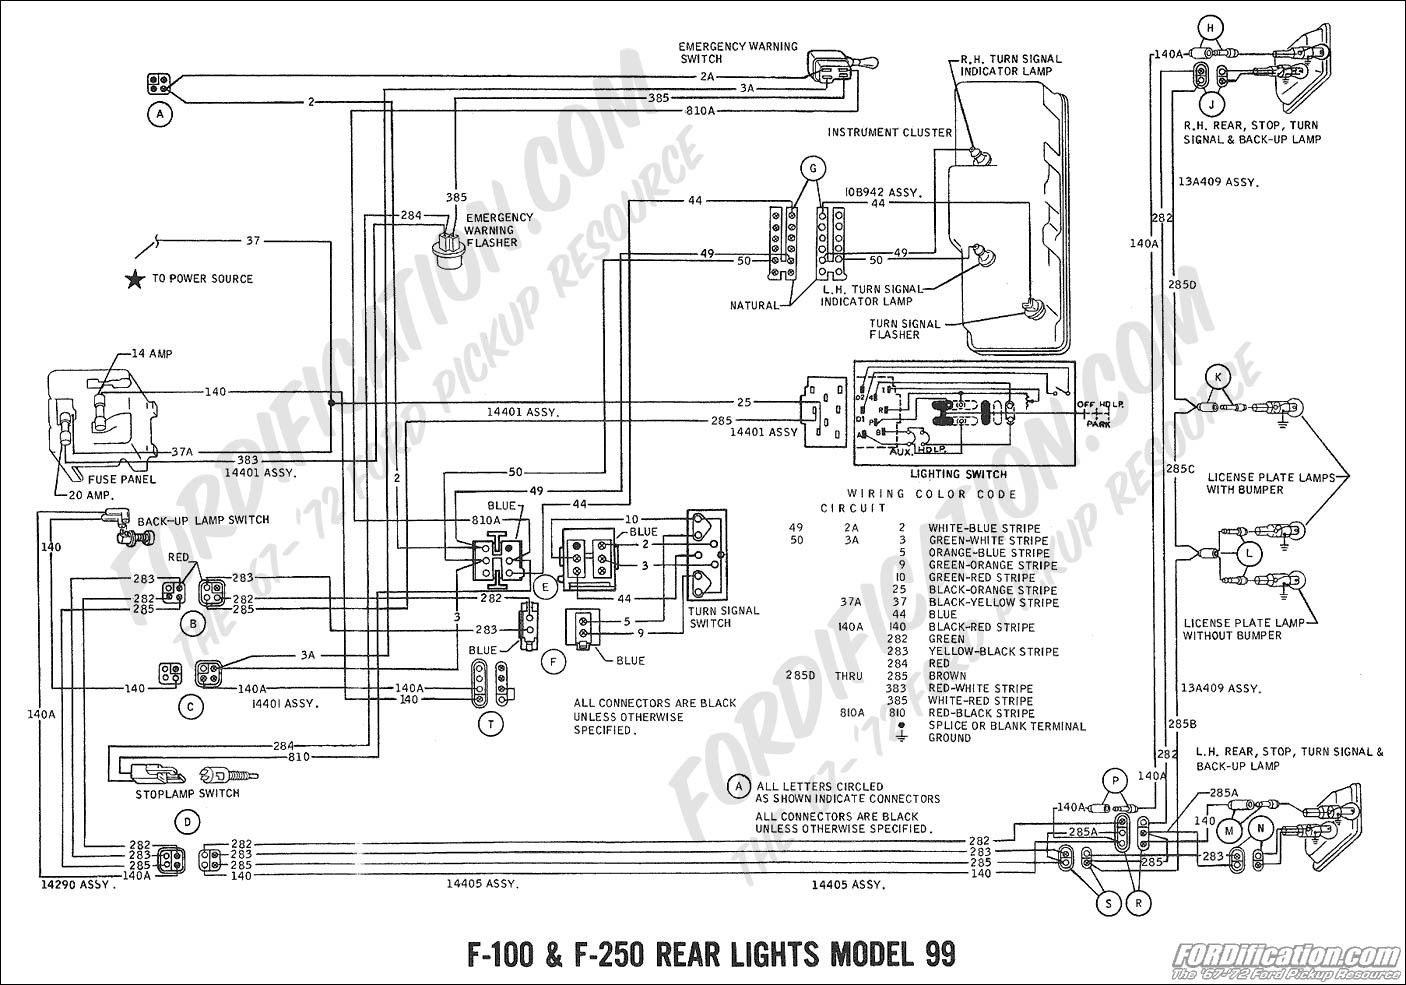 Wiring Schematic for 1999 F250 ford Truck Technical Drawings and Schematics - Section H - Wiring ...